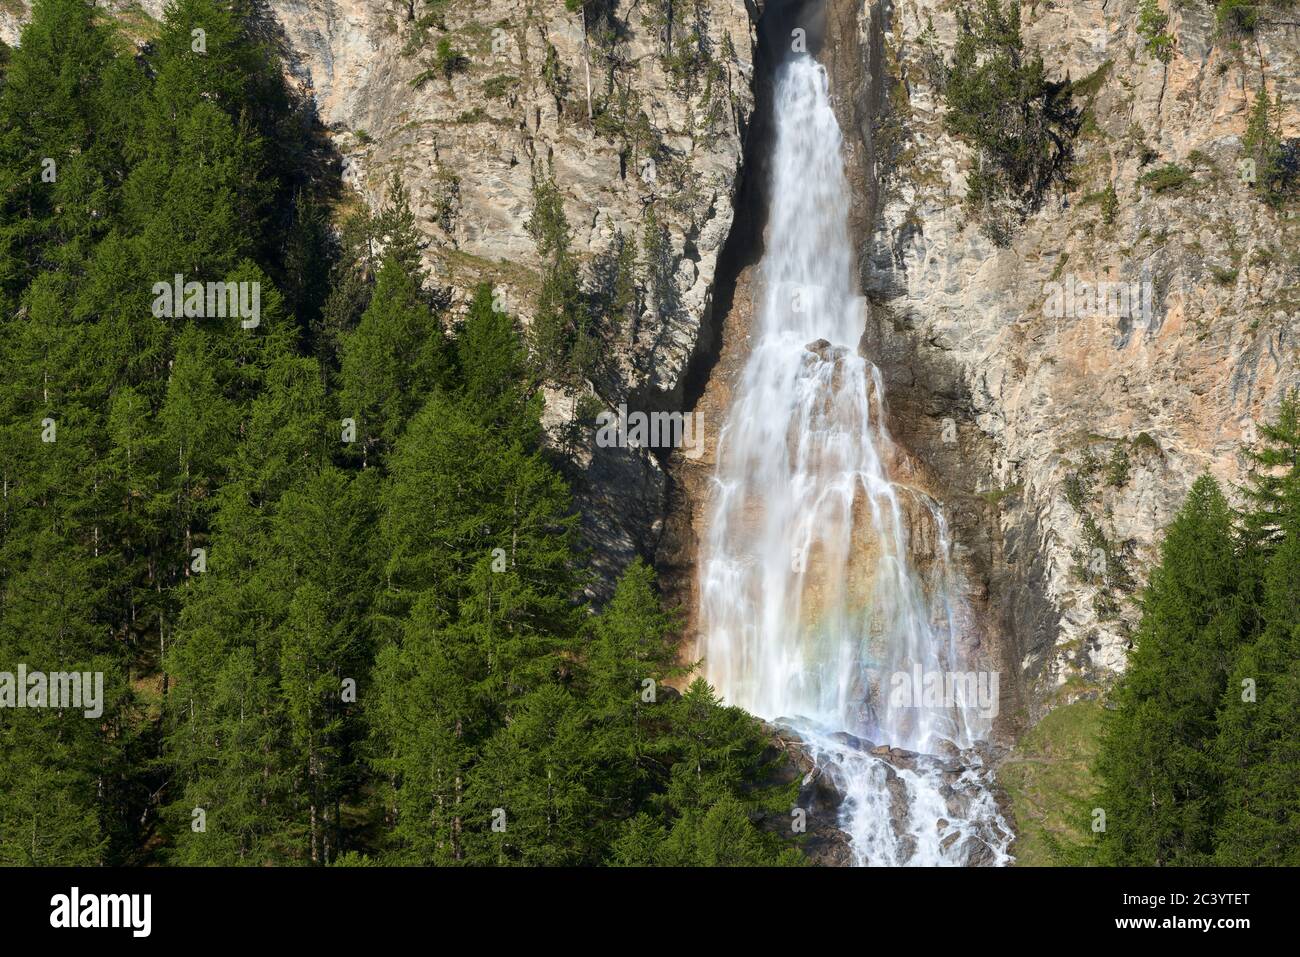 La Pisse waterfall in summer in the Qeyras Regional Natural Park. Ceillac, Hautes-Alpes, Alps, France Stock Photo